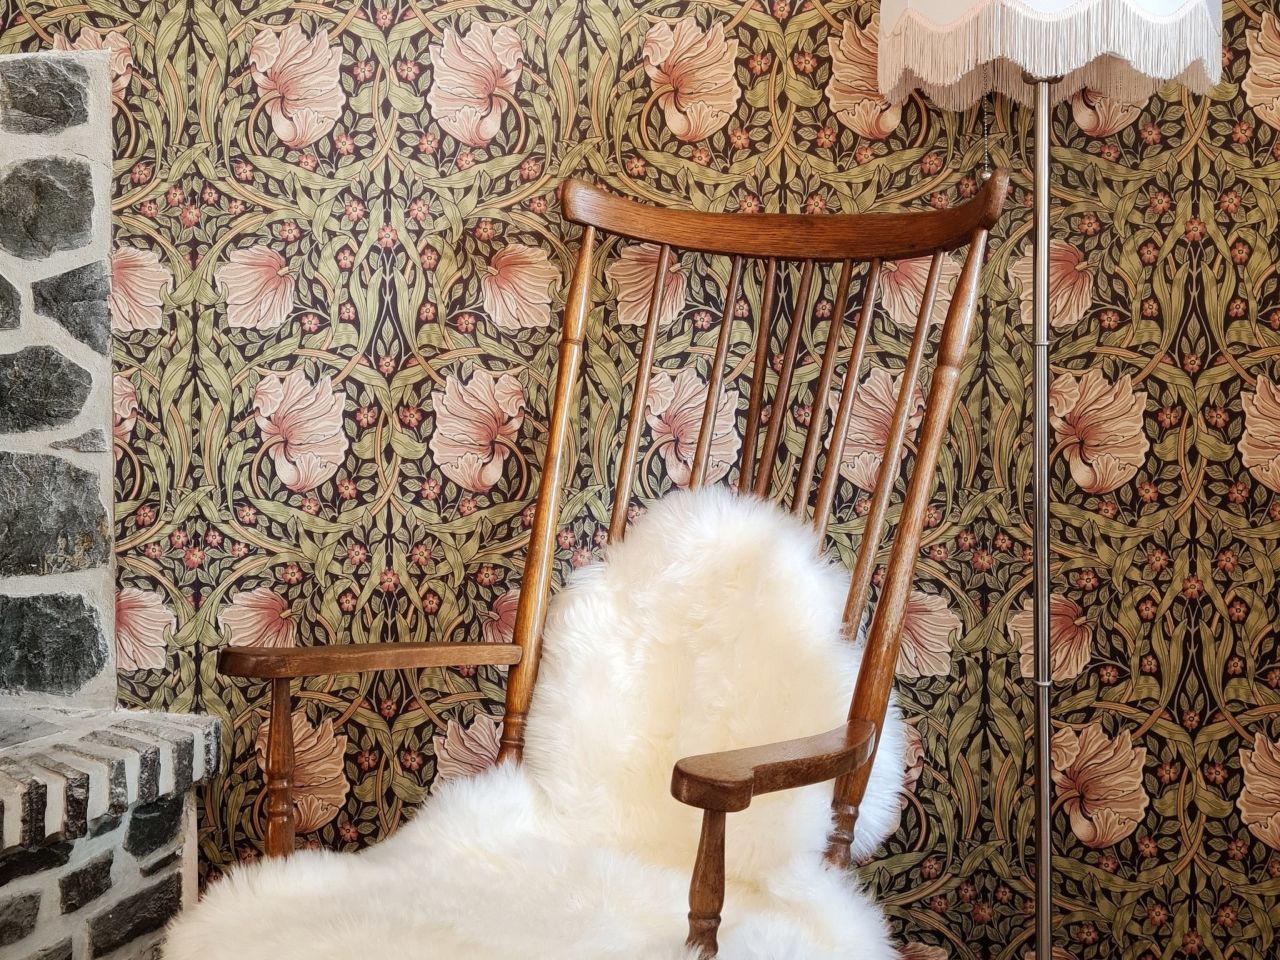 Wallpaper retreats: your safe haven from the world